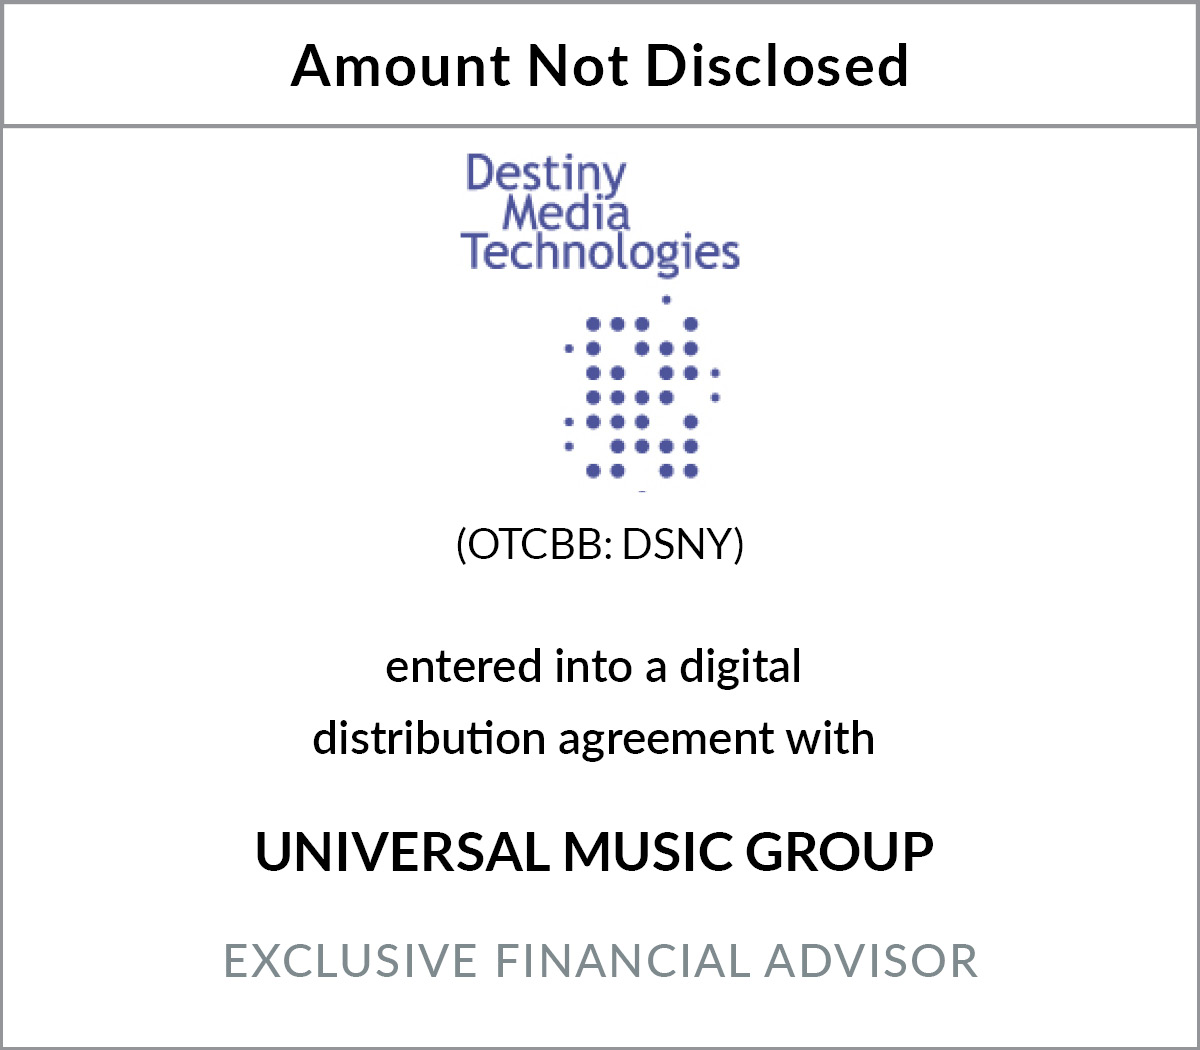 Destiny Media Technologies,Inc. entered into a digital distribution agreement with Universal Music Group